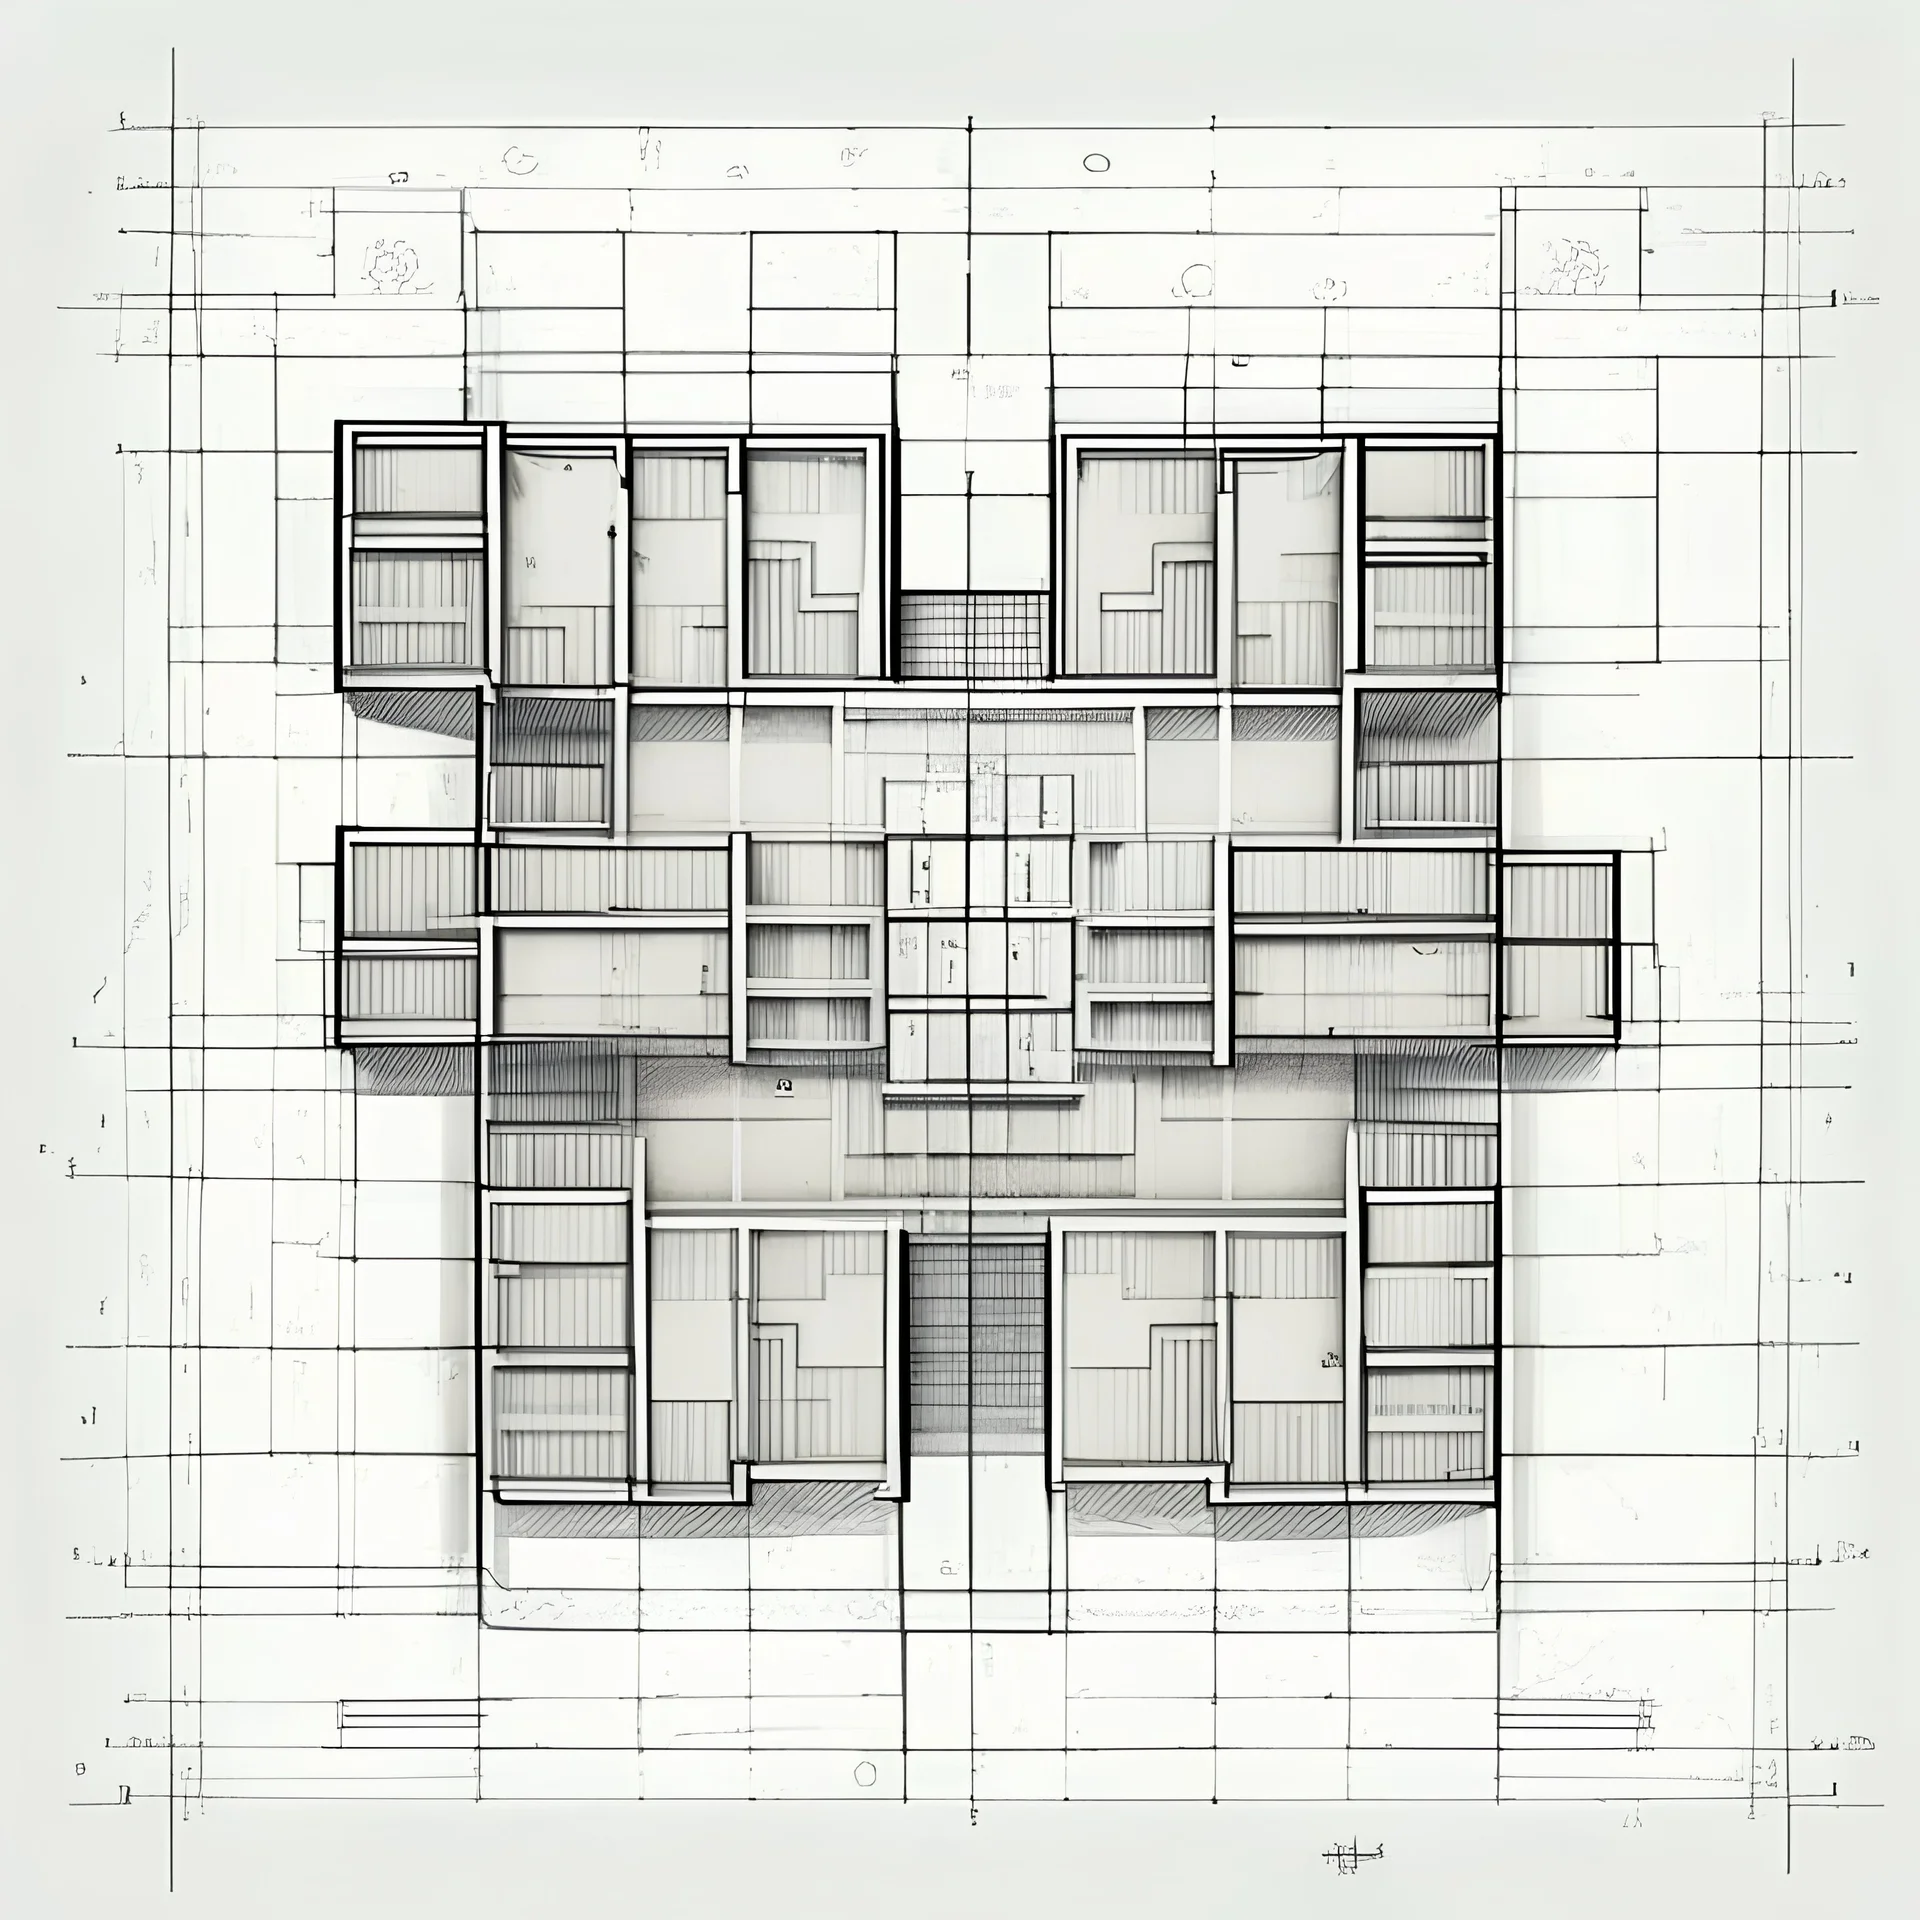 technical plan of the building for 100 squares, drawing